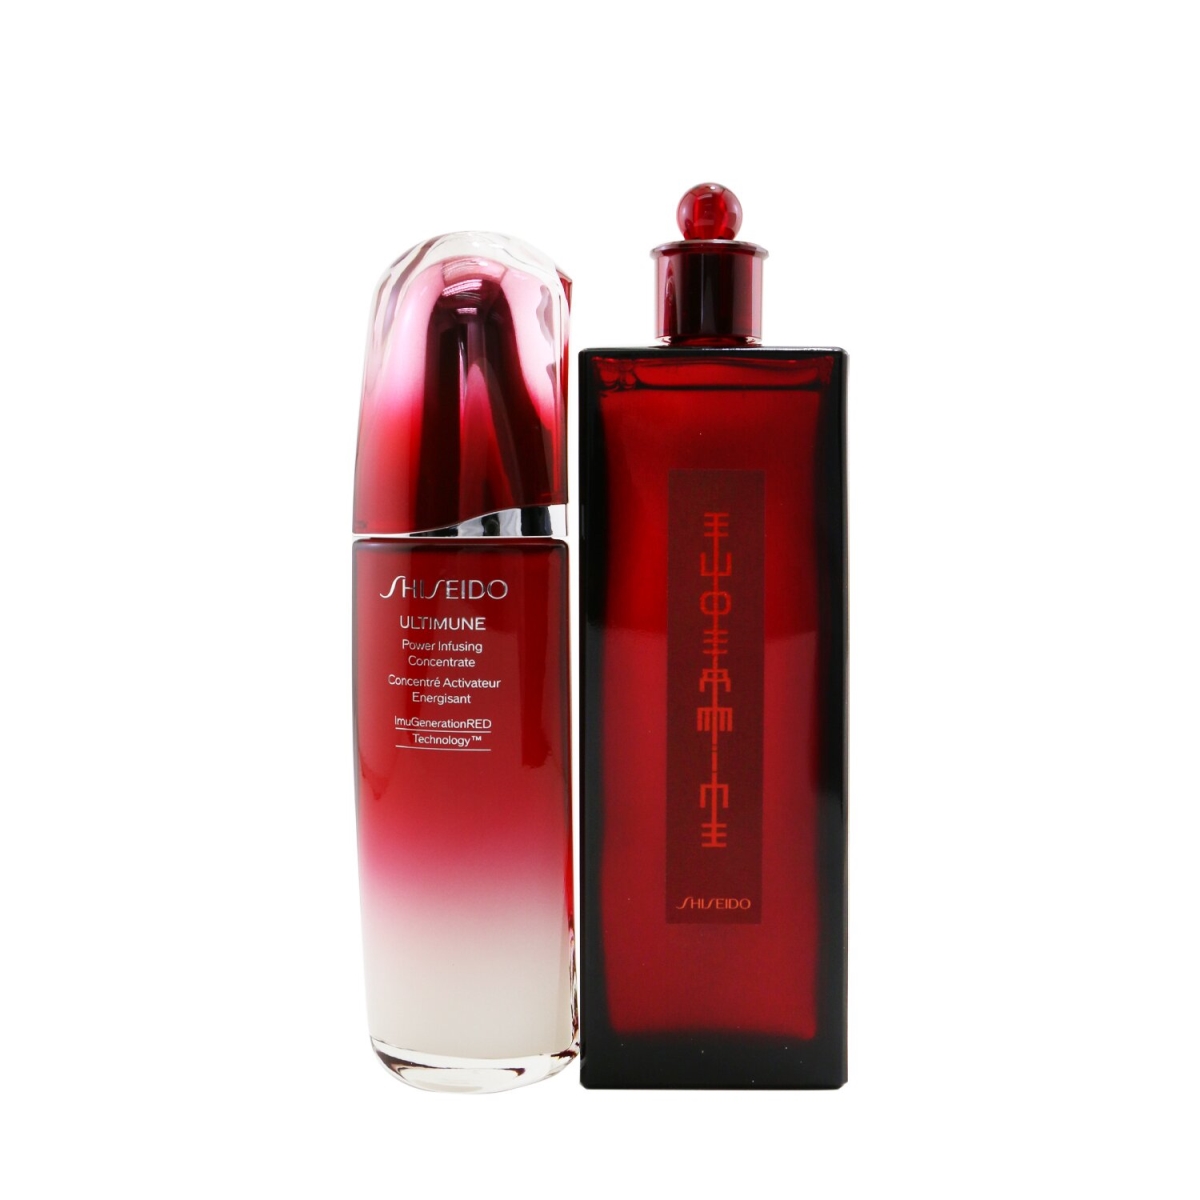 Picture of Shiseido 265399 Ultimune Power & Revitalizing Set with Ultimune Power Infusing Concentrate 100 ml Plus 200 ml Eudermine Revitalizing Essence - 2 Piece